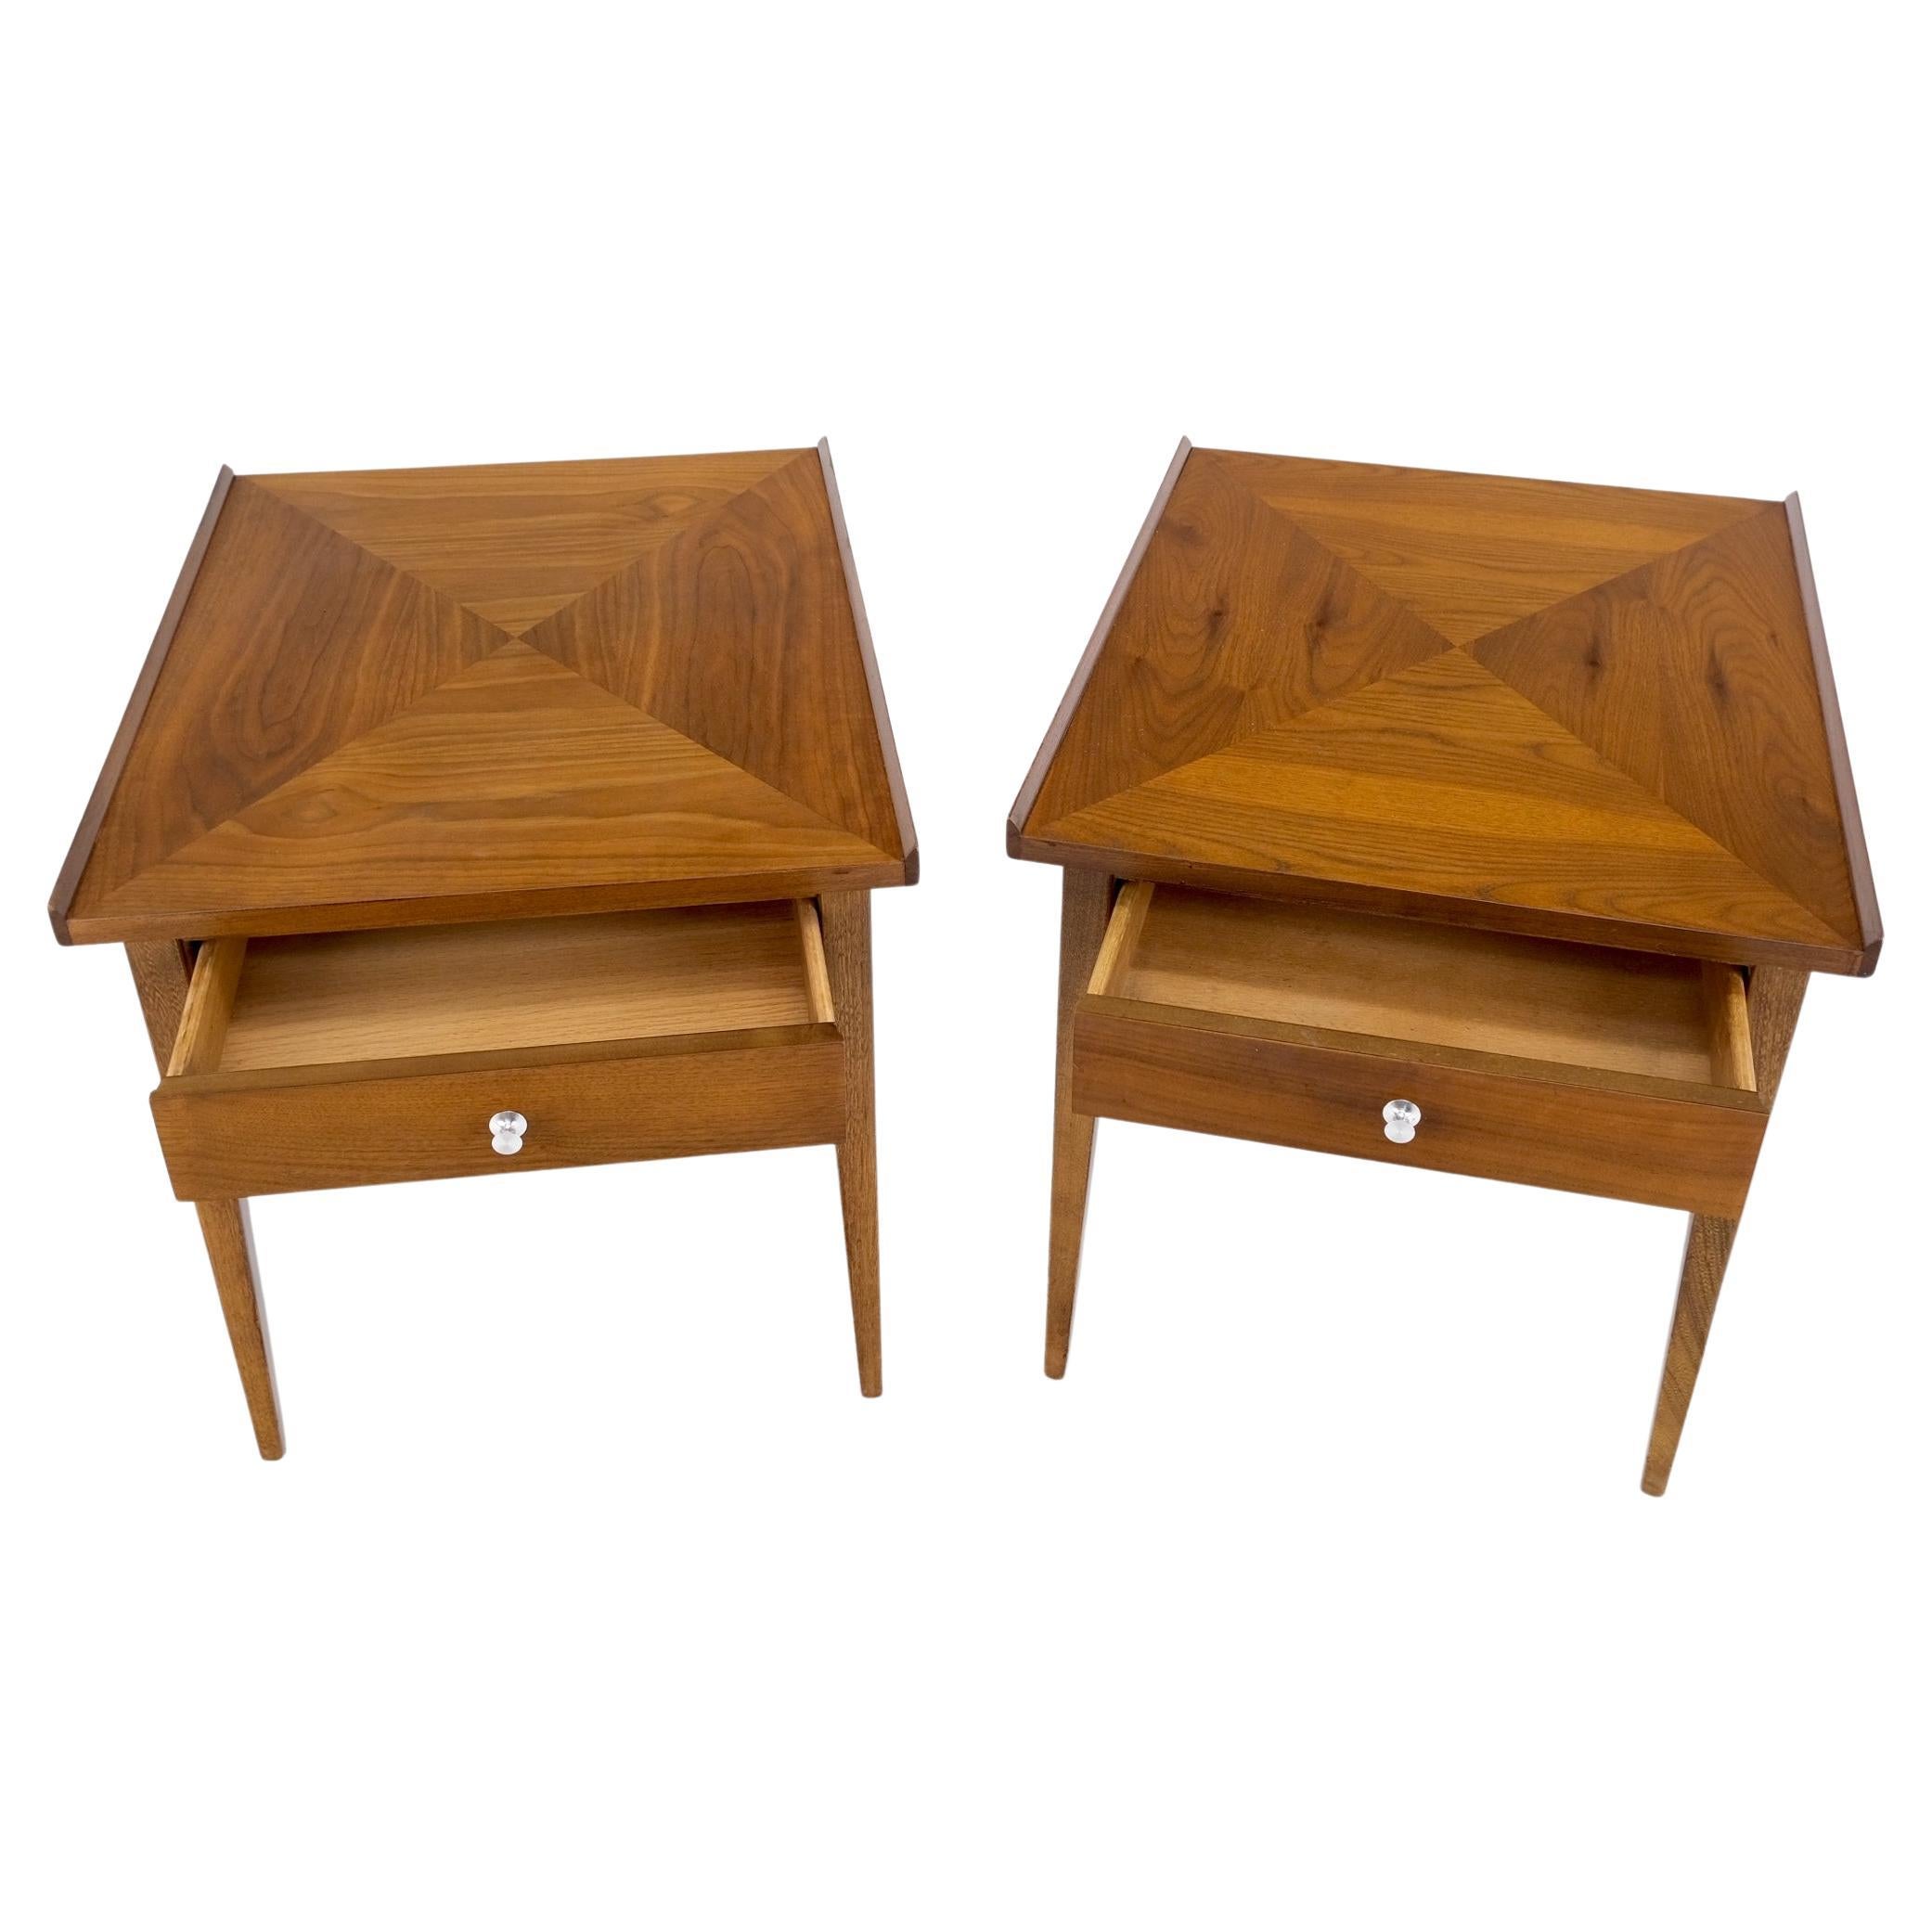 Pair of Walnut Rolled Edges Square One Drawer Tapered Legs End Side Tables Stand For Sale